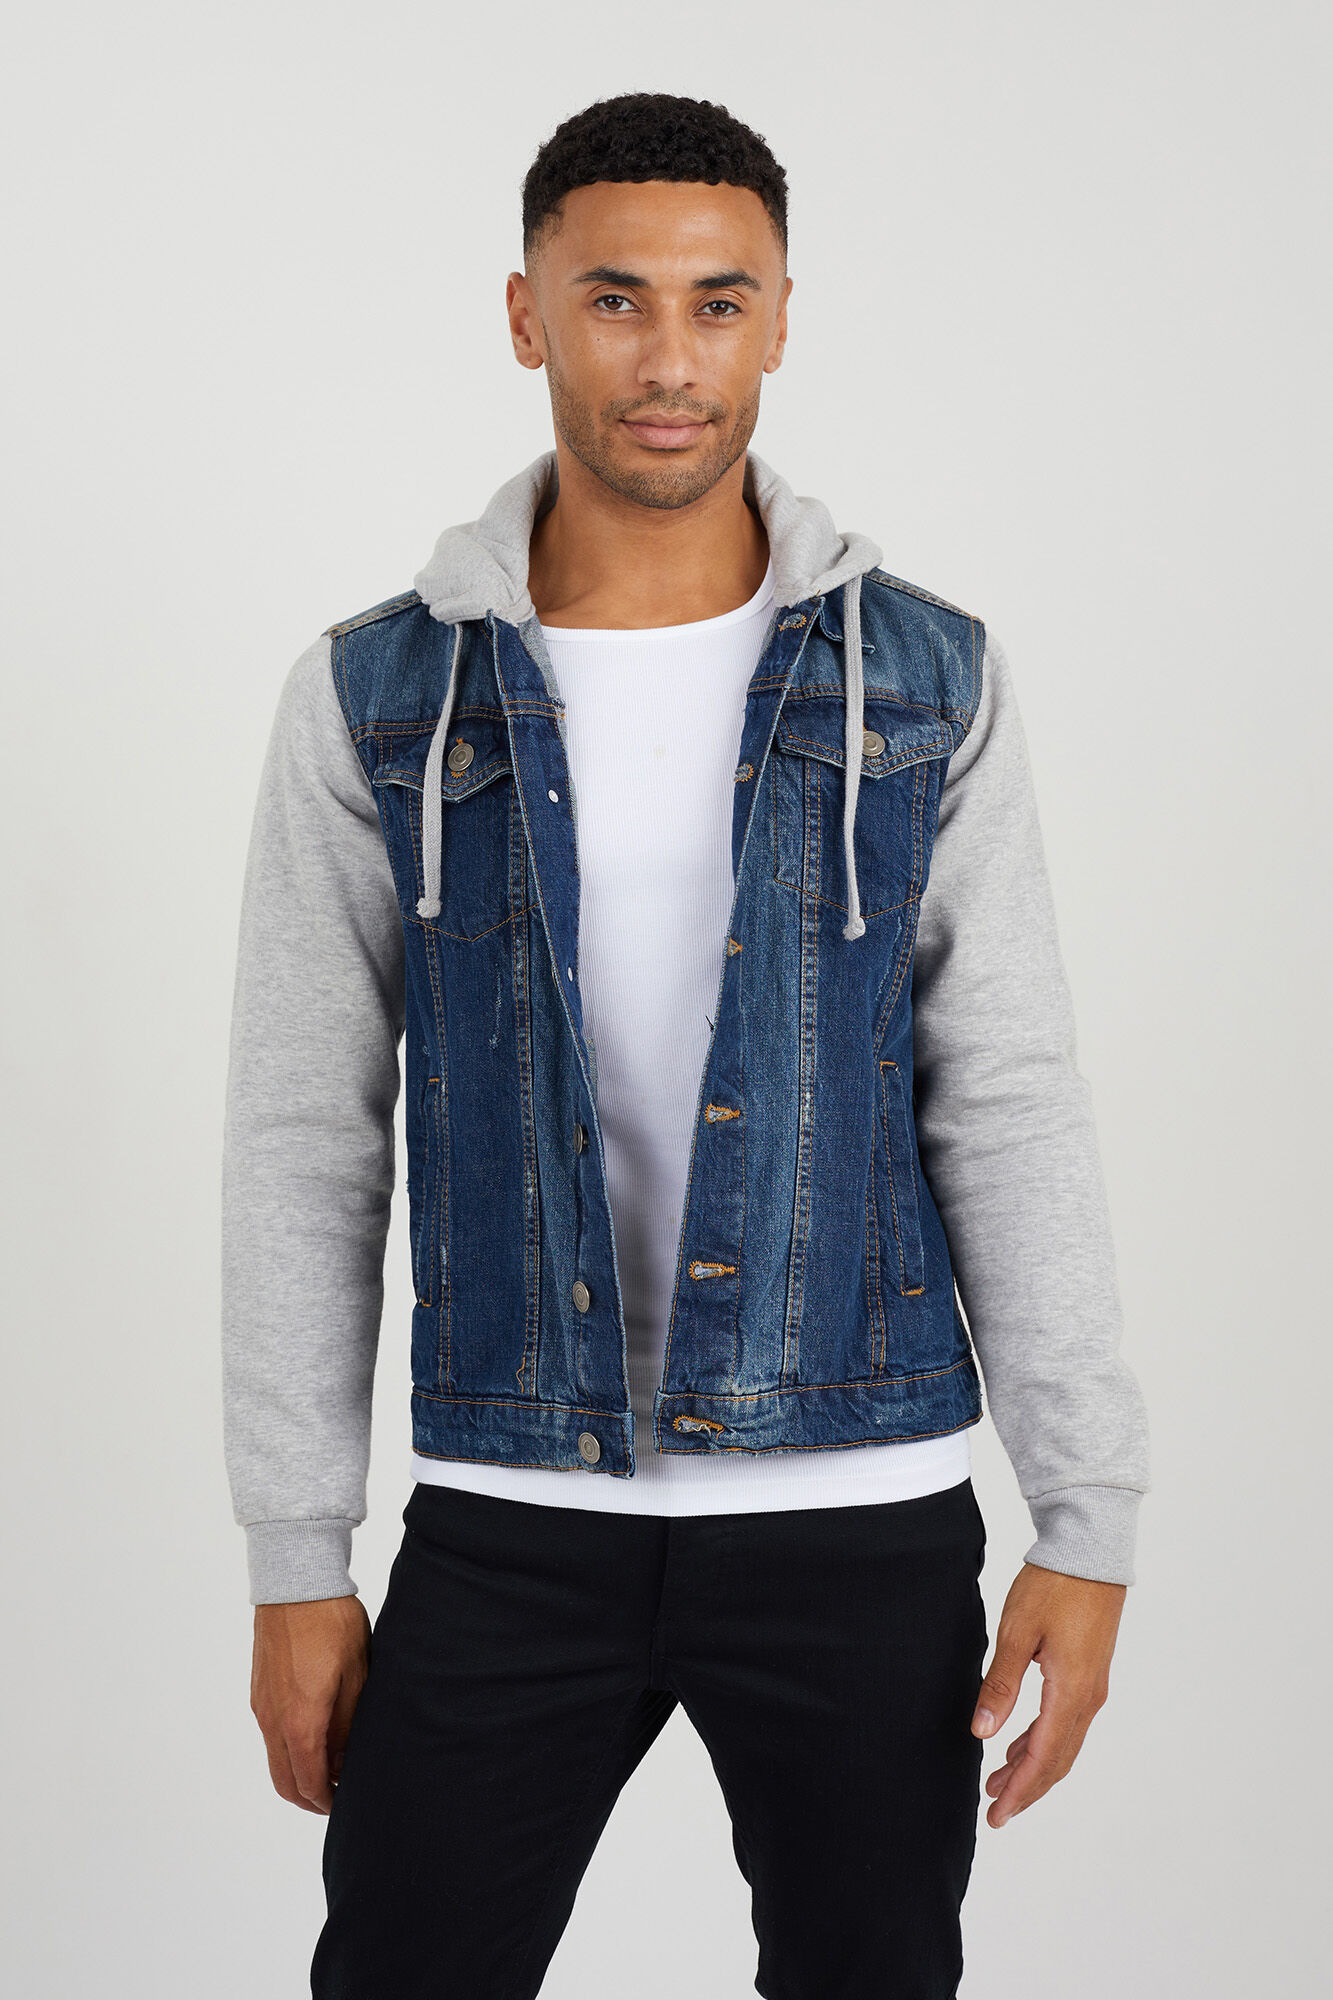 CS Men's Ripped Distressed Denim Jean Vest With Removable Hood  (Black/Red-Buttons, S) - Walmart.com